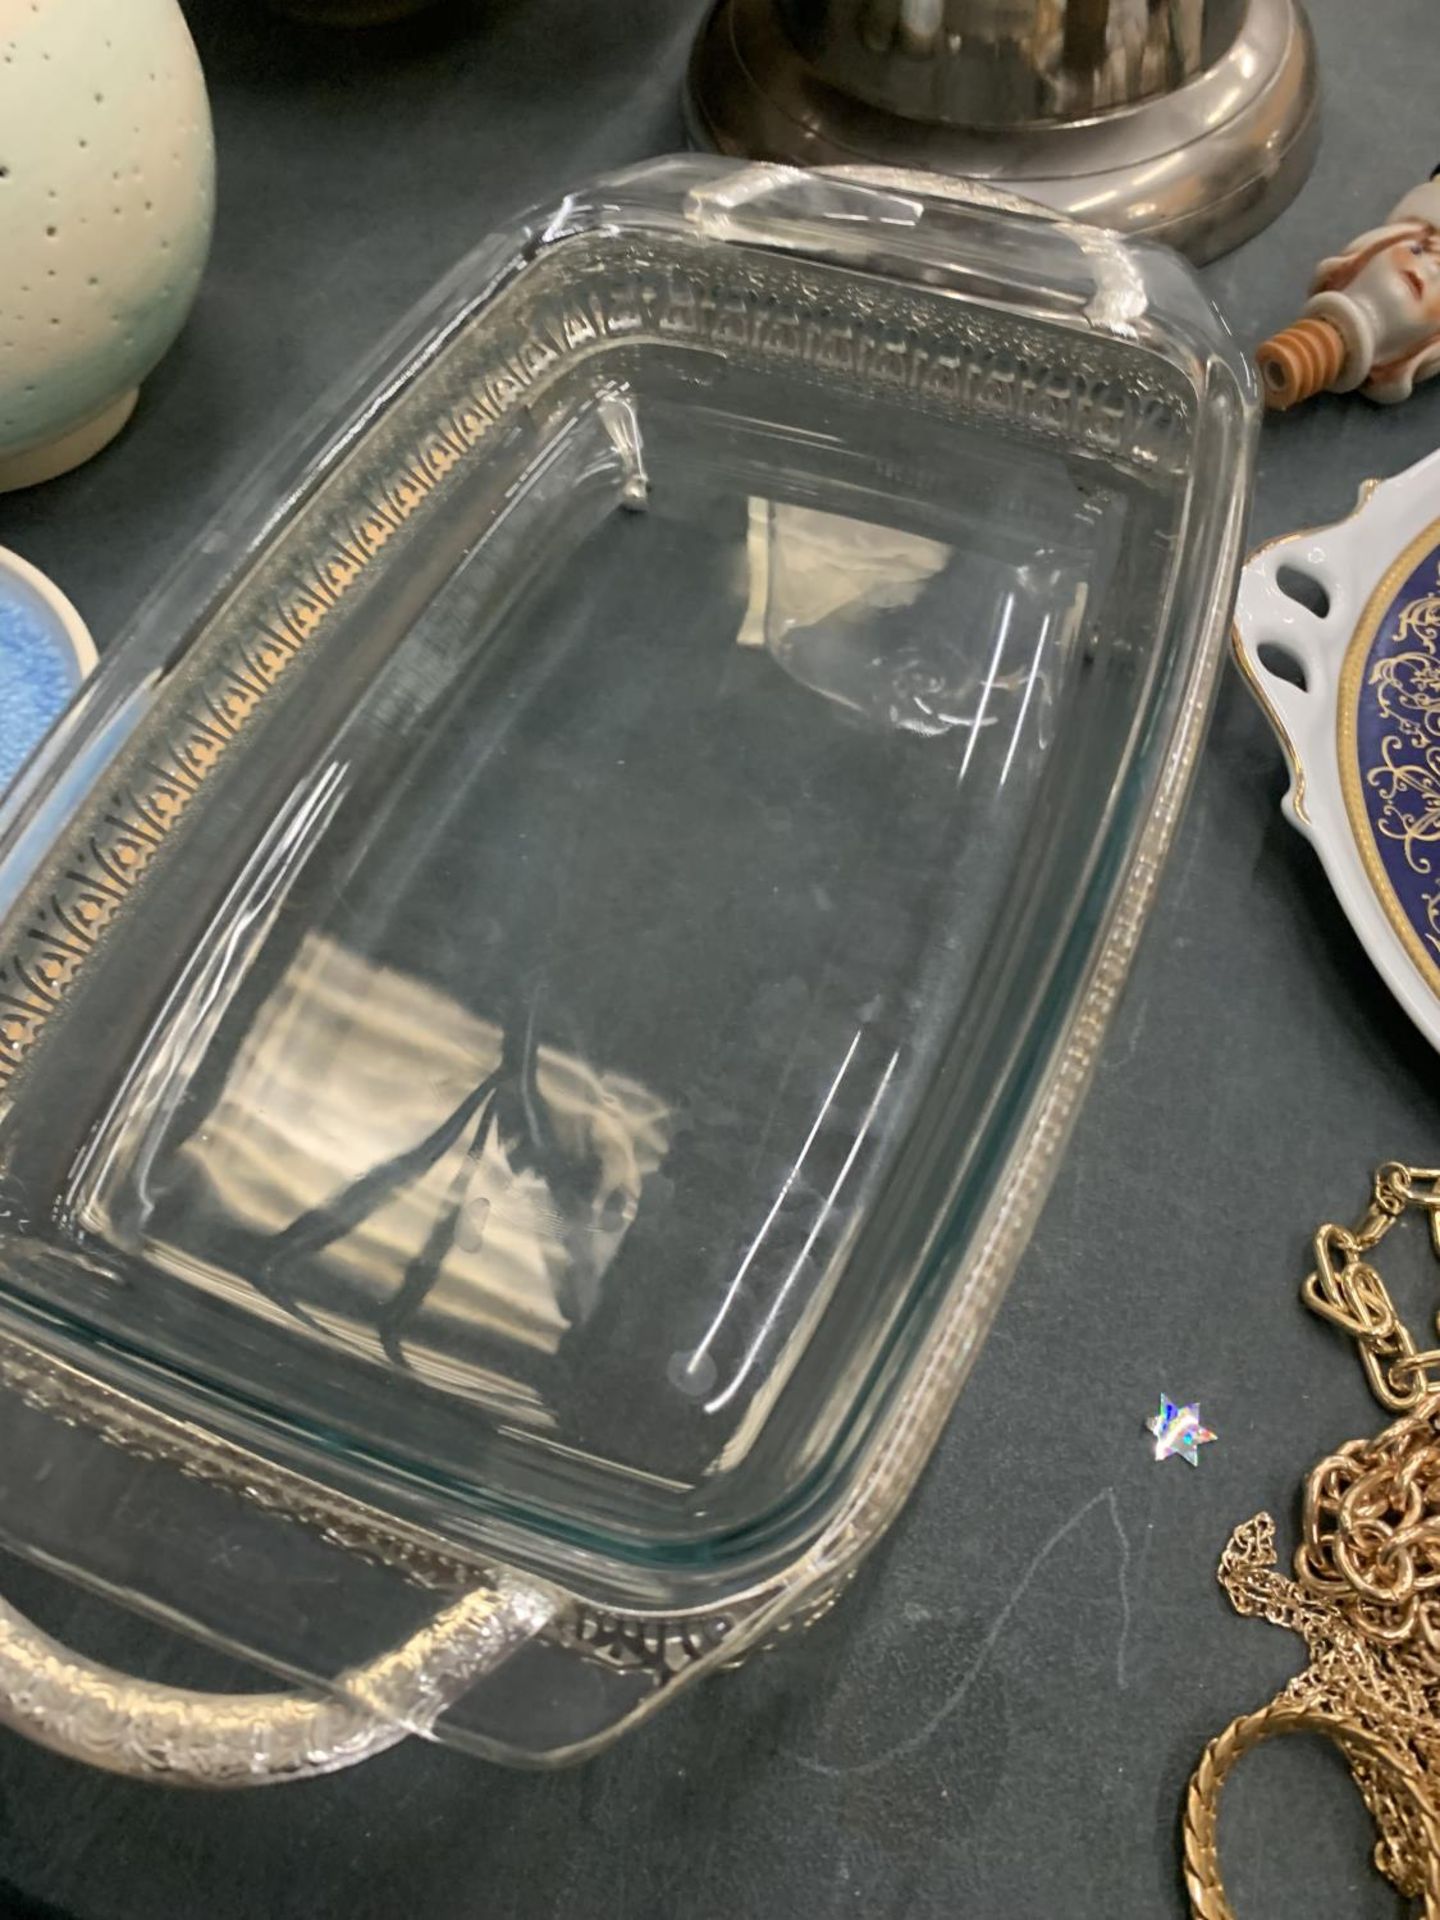 A LARGE GLASS SERVING DISH WITH A SILVER PLATED STAND AND LID HEIGHT 9CM, LENGTH 28CM, DEPTH 20CM - Image 3 of 3